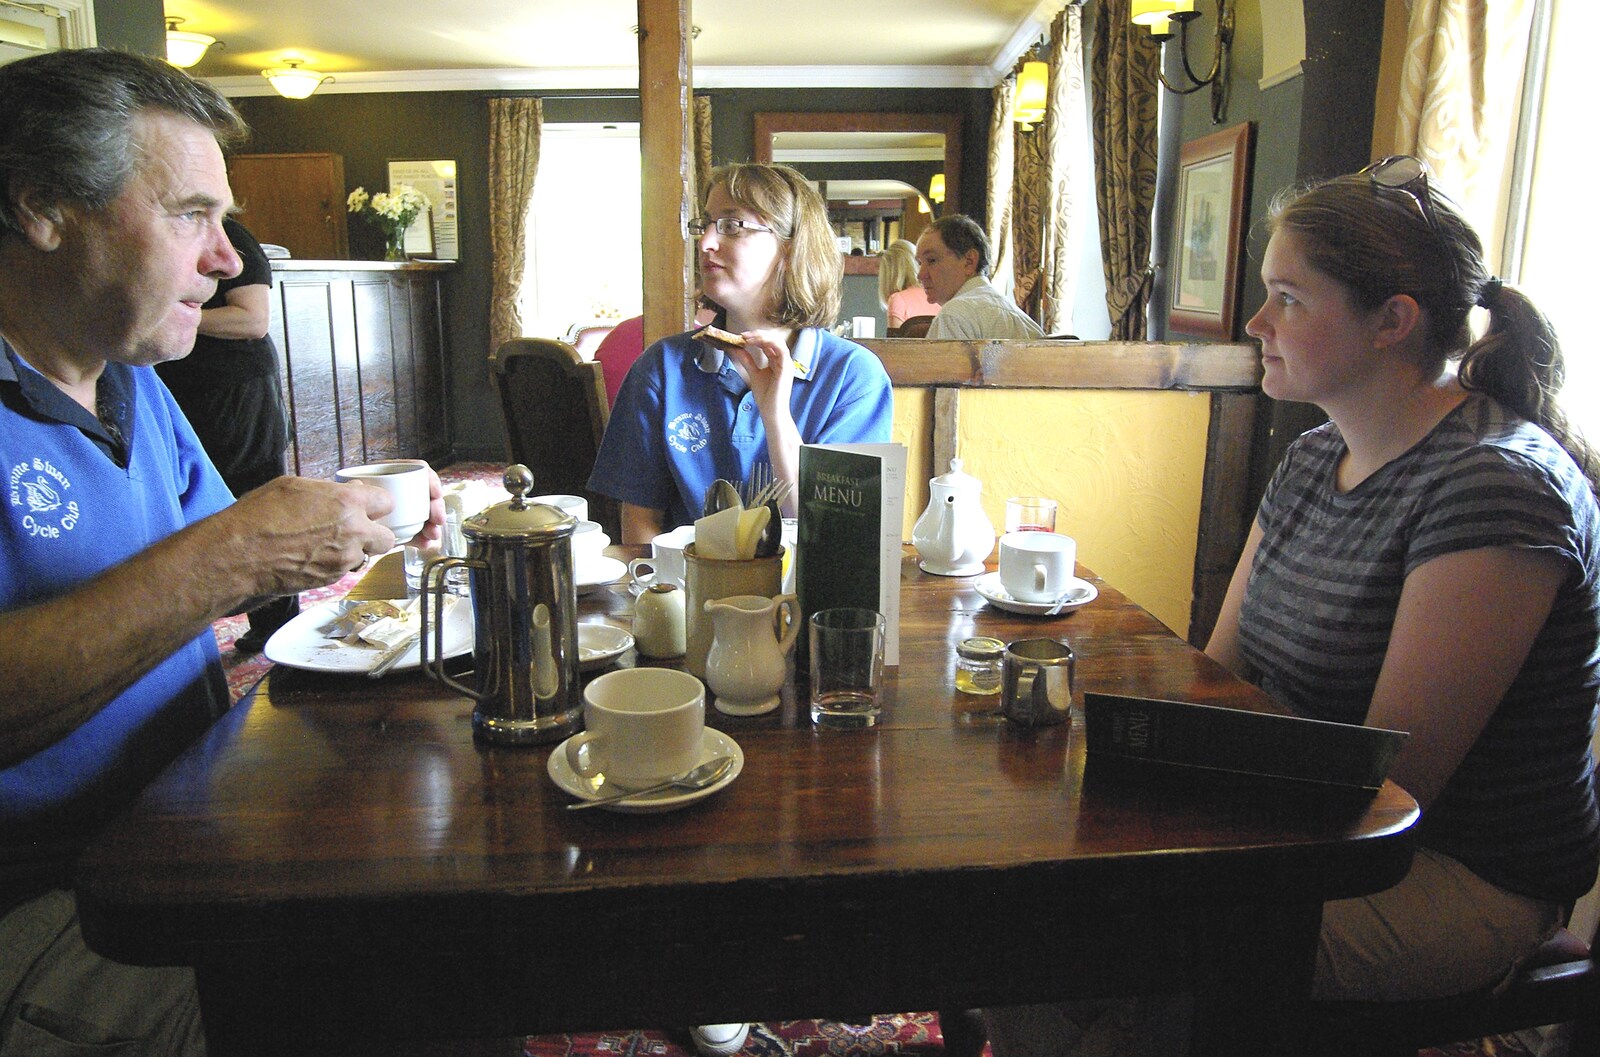 The BSCC Weekend Away, Thaxted, Essex - 10th May 2008: Alan, Sue and Isobel eat breakfast